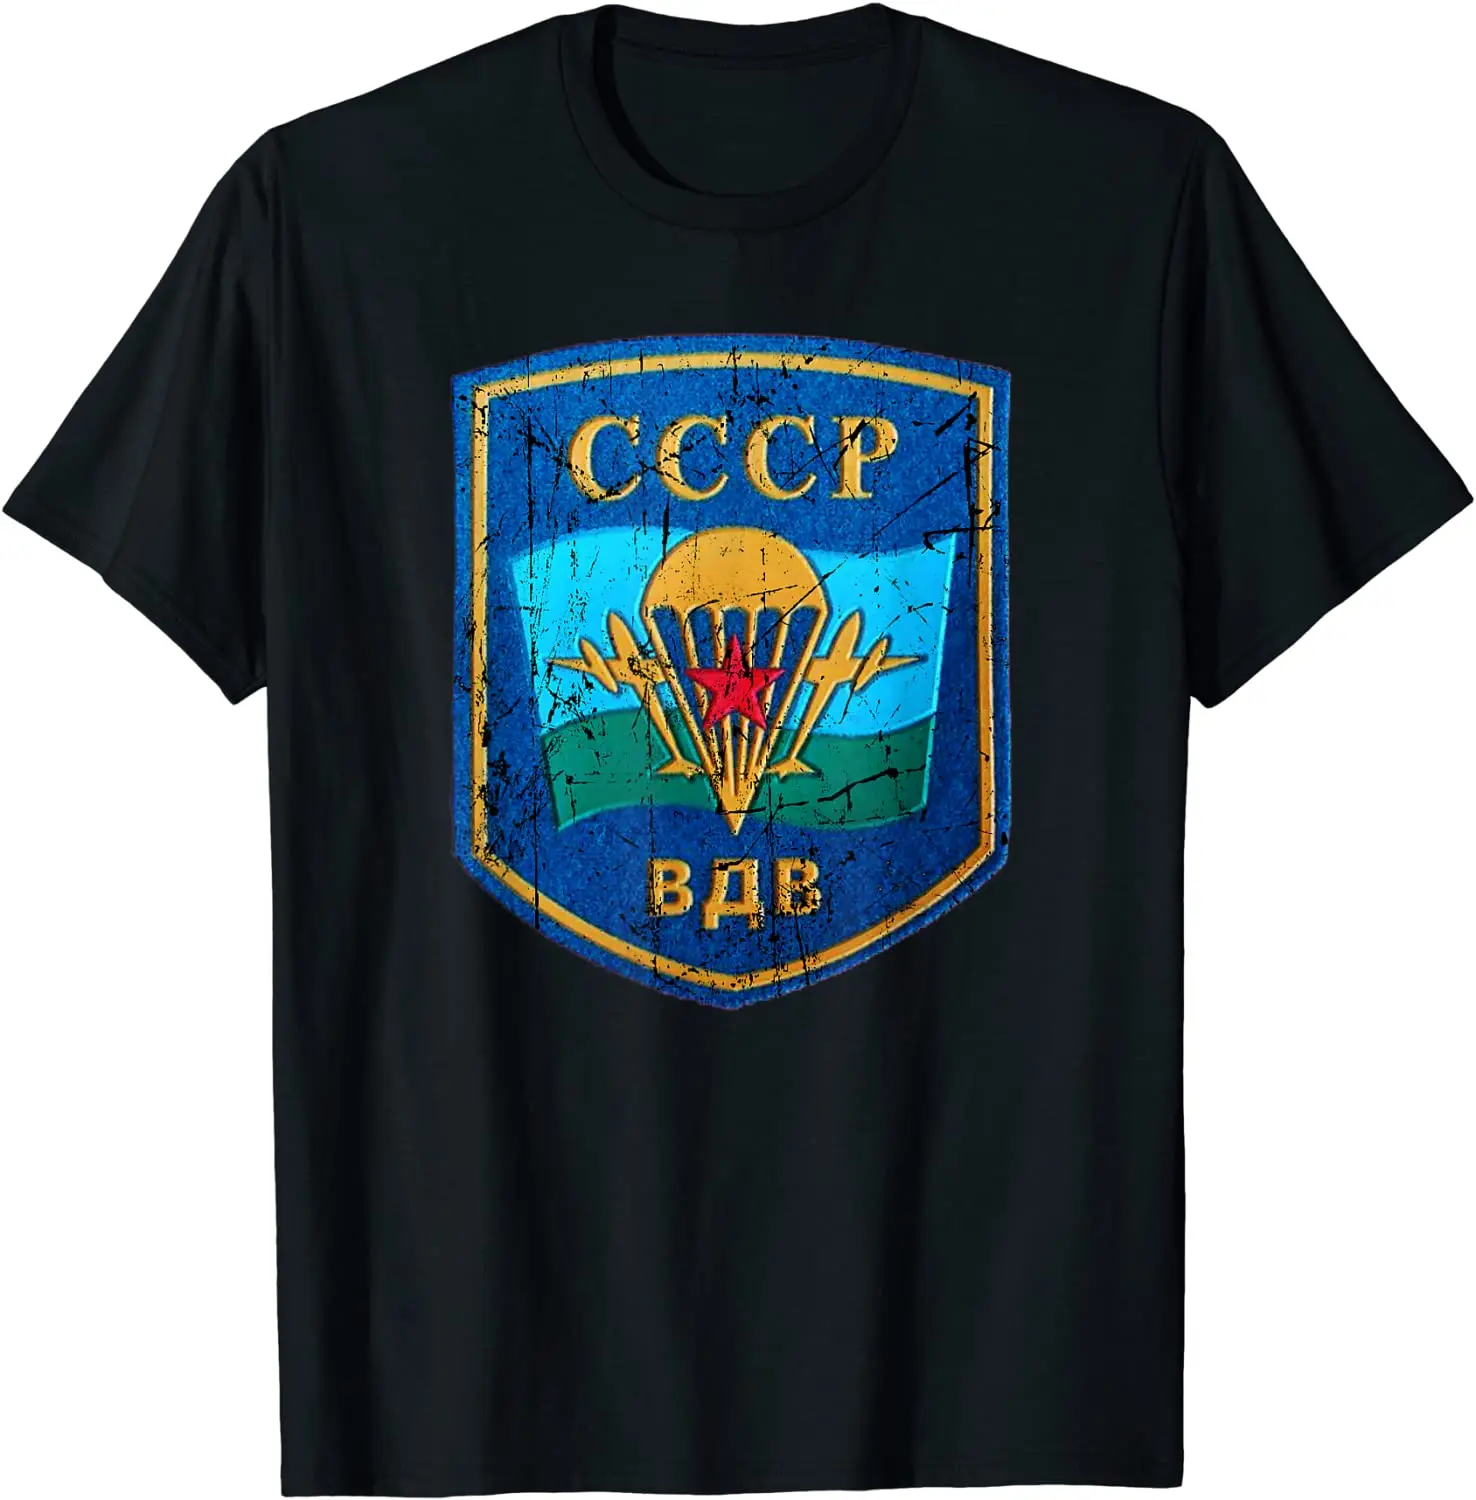 

Soviet USSR Airborne Troops Russian VDV Paratroopers Patches T-Shirt. Premium Cotton Short Sleeve O-Neck Mens T Shirt New S-3XL